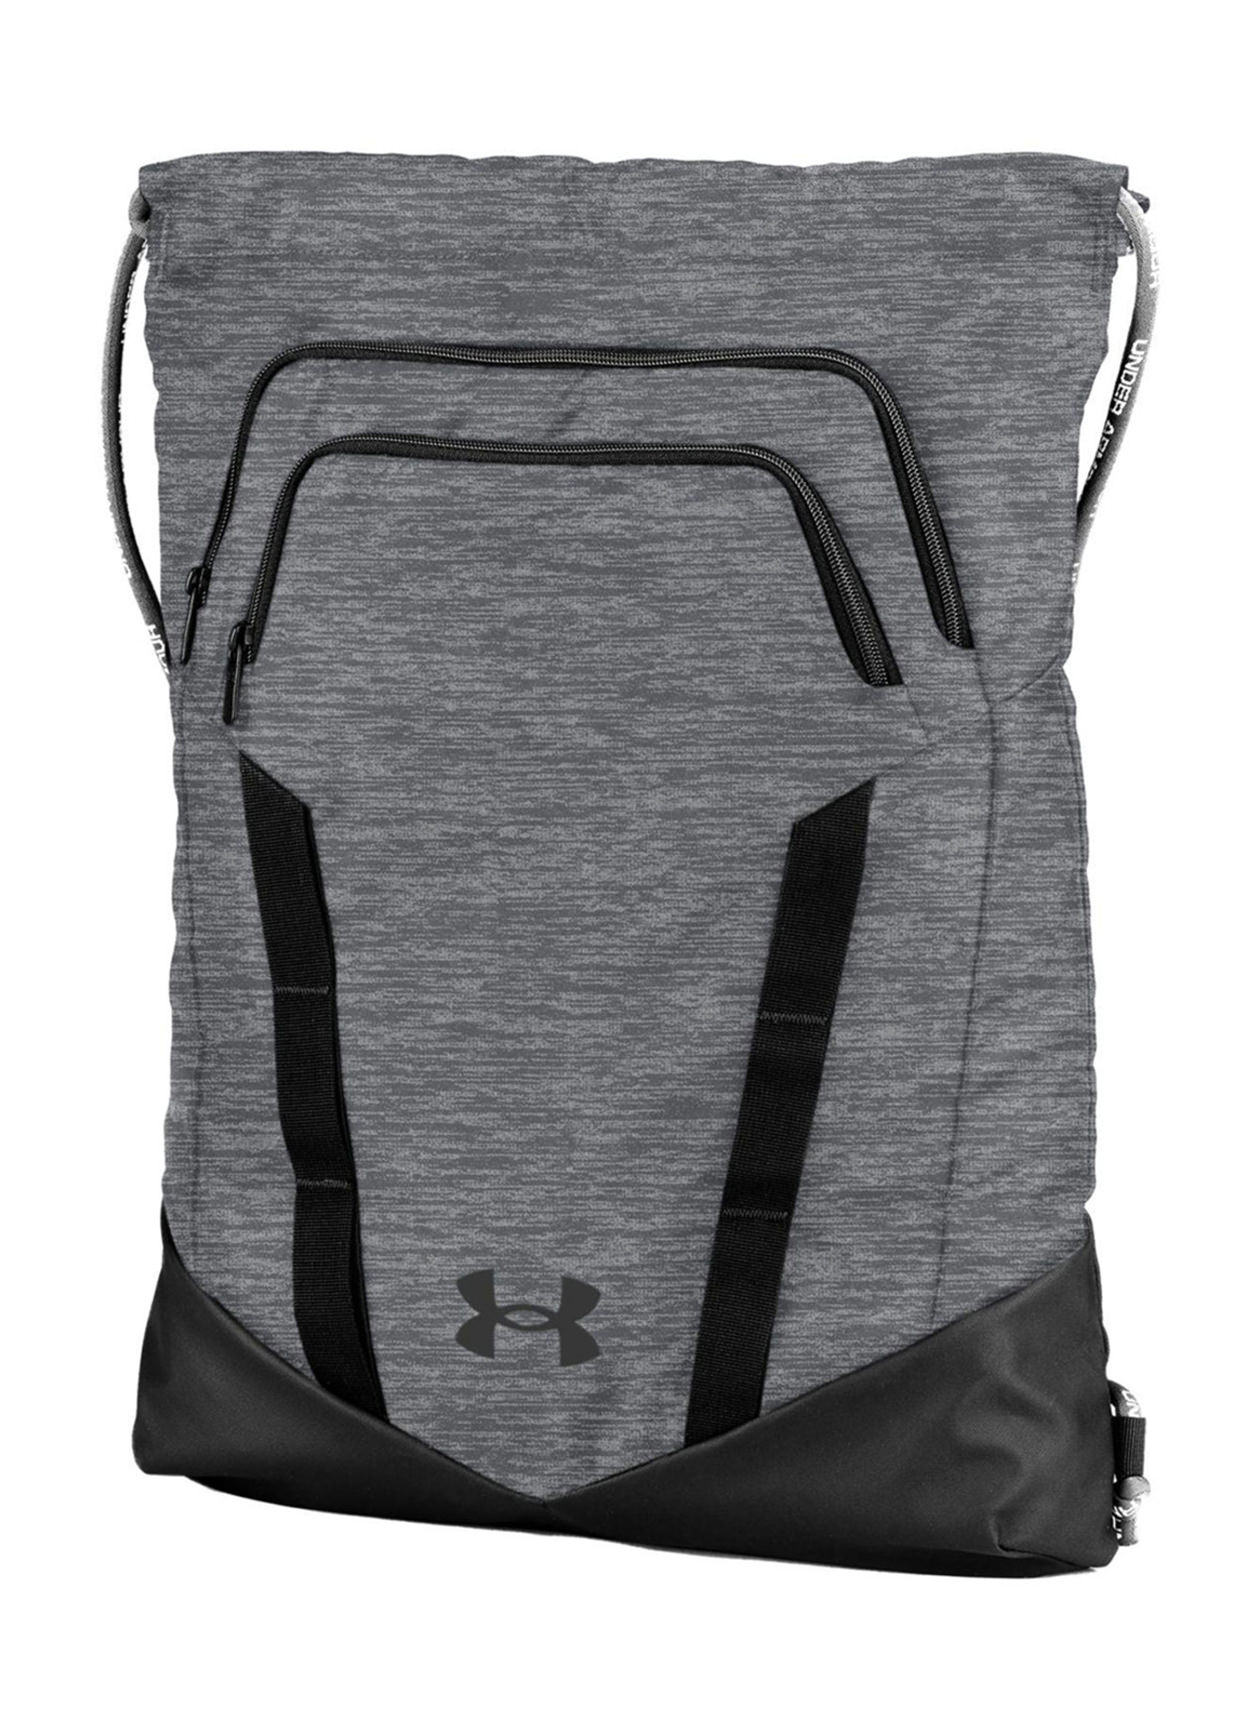 Under Armour Pitch Grey Novelty Undeniable Sackpack 2.0